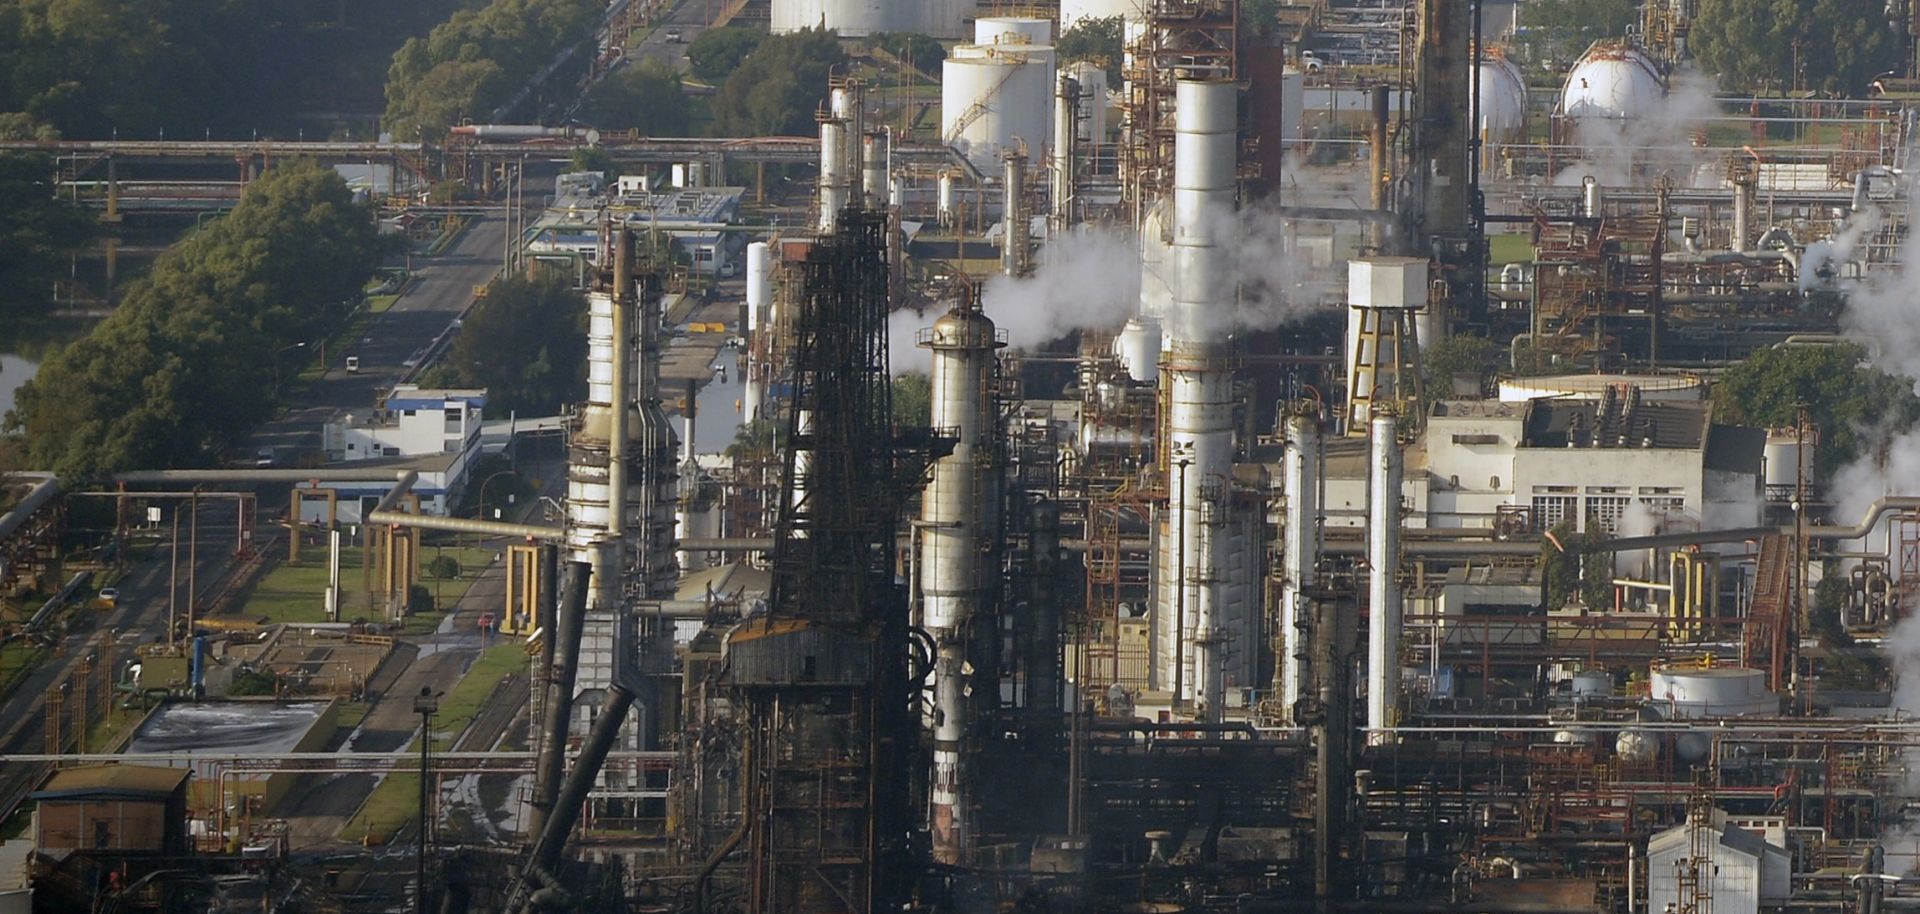 Aereal view of the refinery of Argentine state-owned oil company.